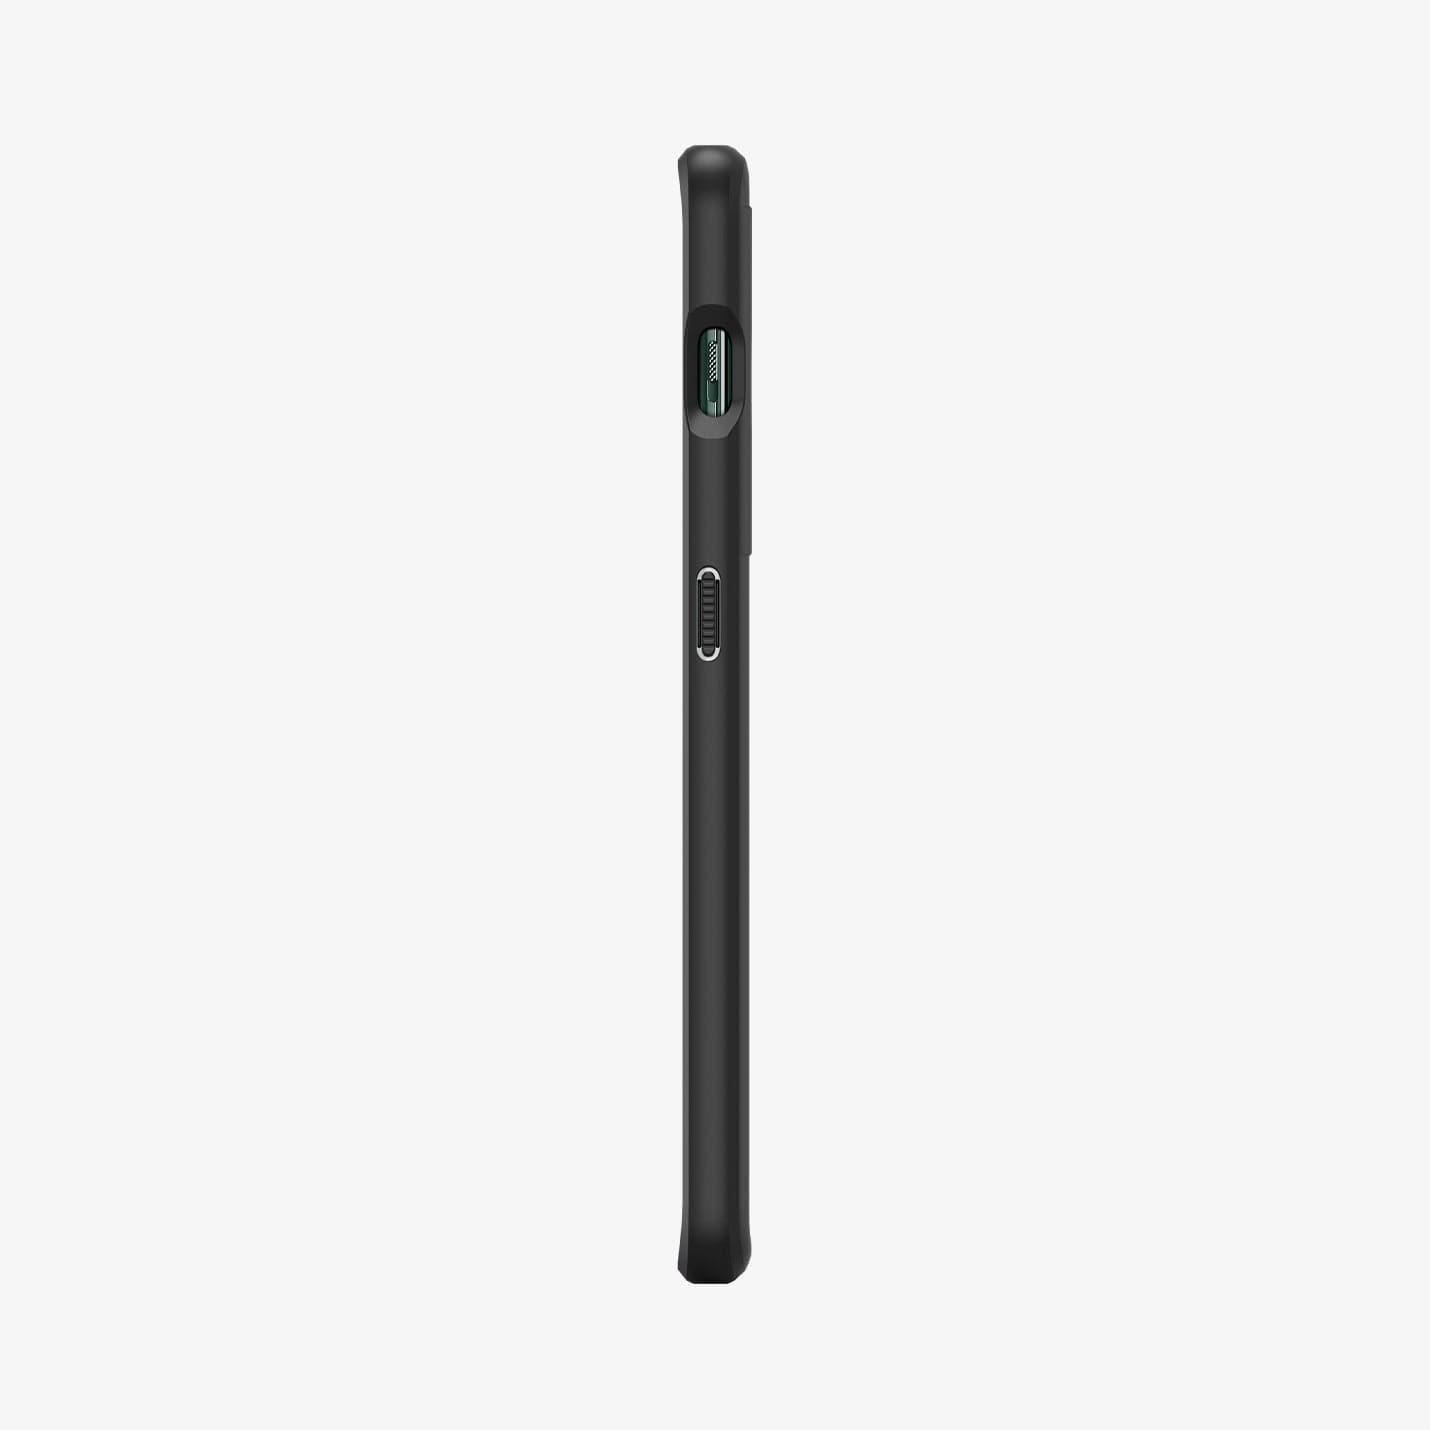 ACS05803 - OnePlus 11 Series Ultra Hybrid Case in Matte Black showing the side